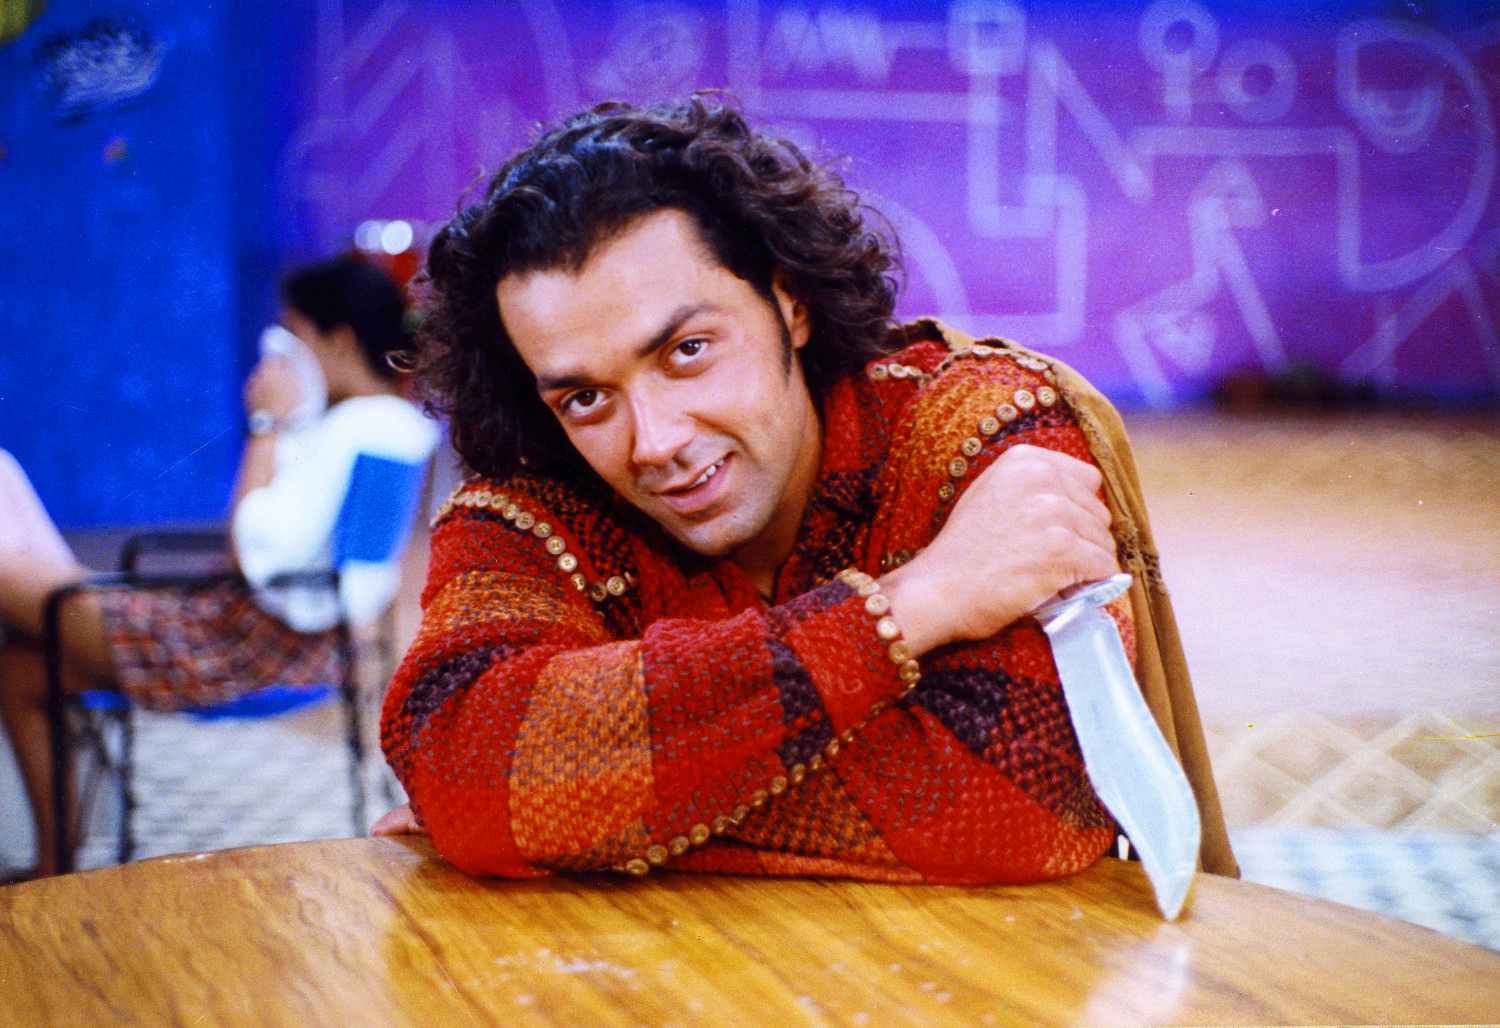 Bobby Deol’s superhit film ‘Soldier’ turns 21